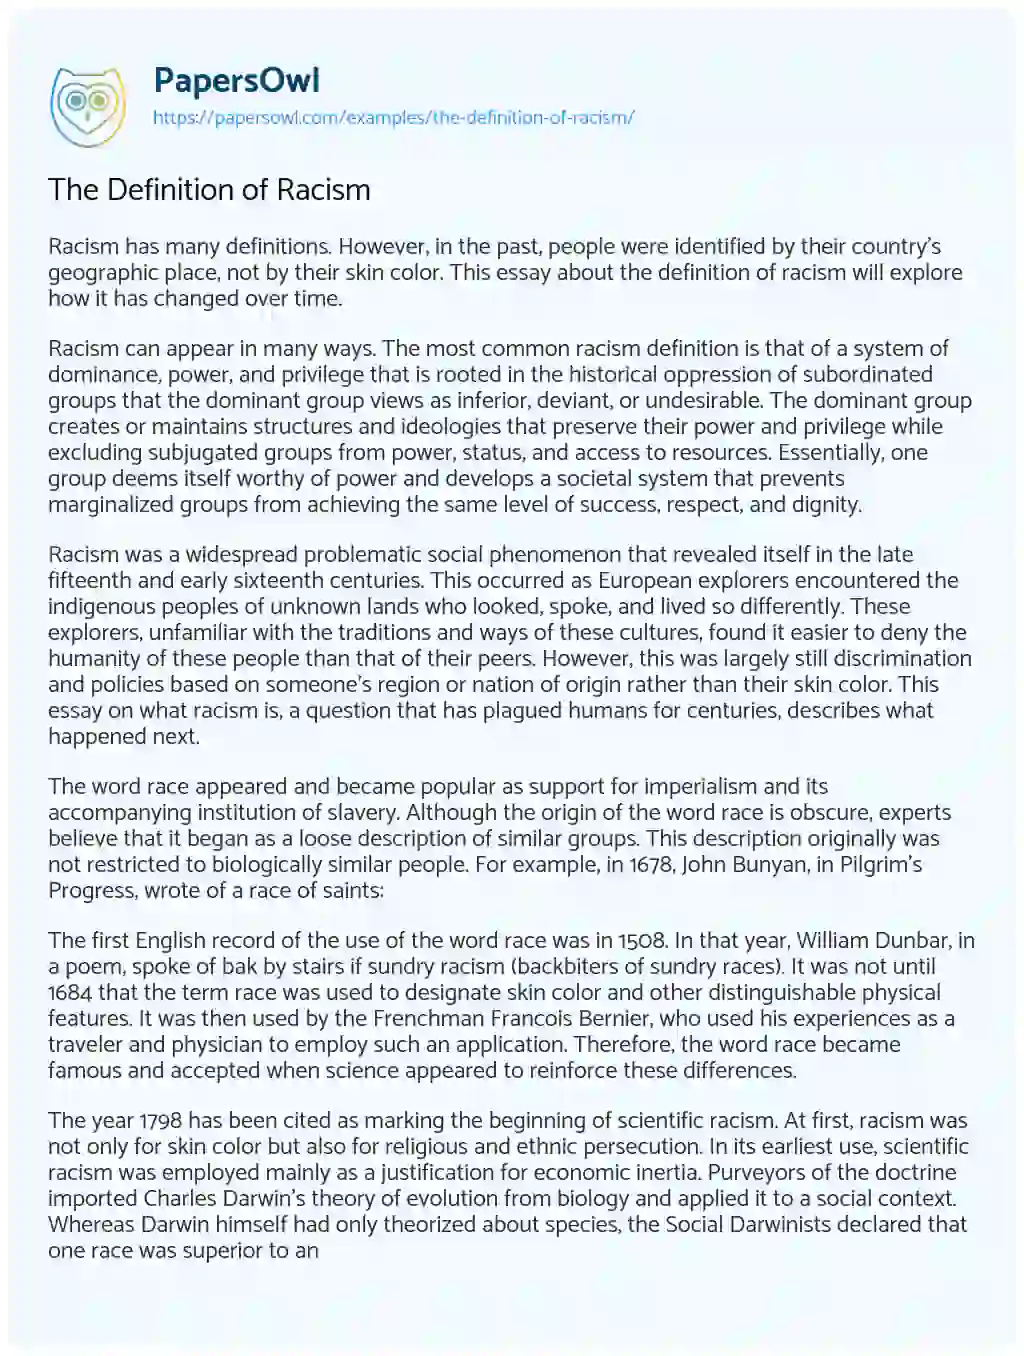 Essay on The Definition of Racism